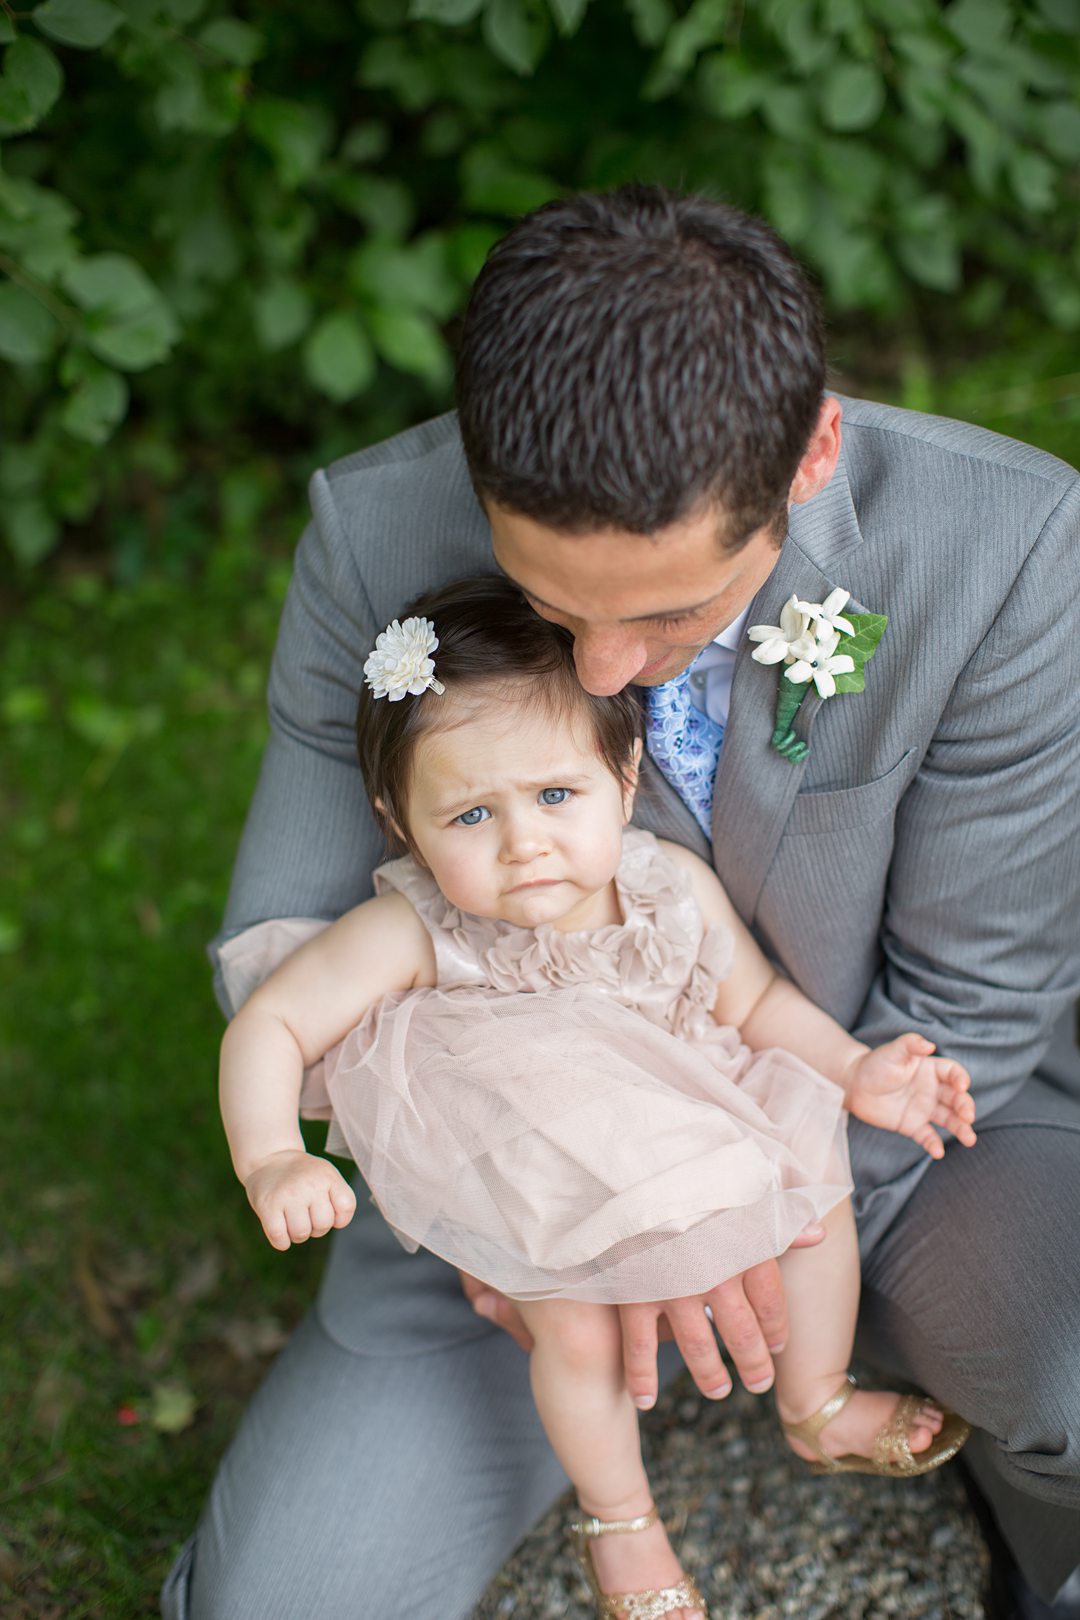 The groom and the flower girl at his destination wedding in Kent, Connecticut about 90 minutes from NYC. Photos by Mikkel Paige Photography.